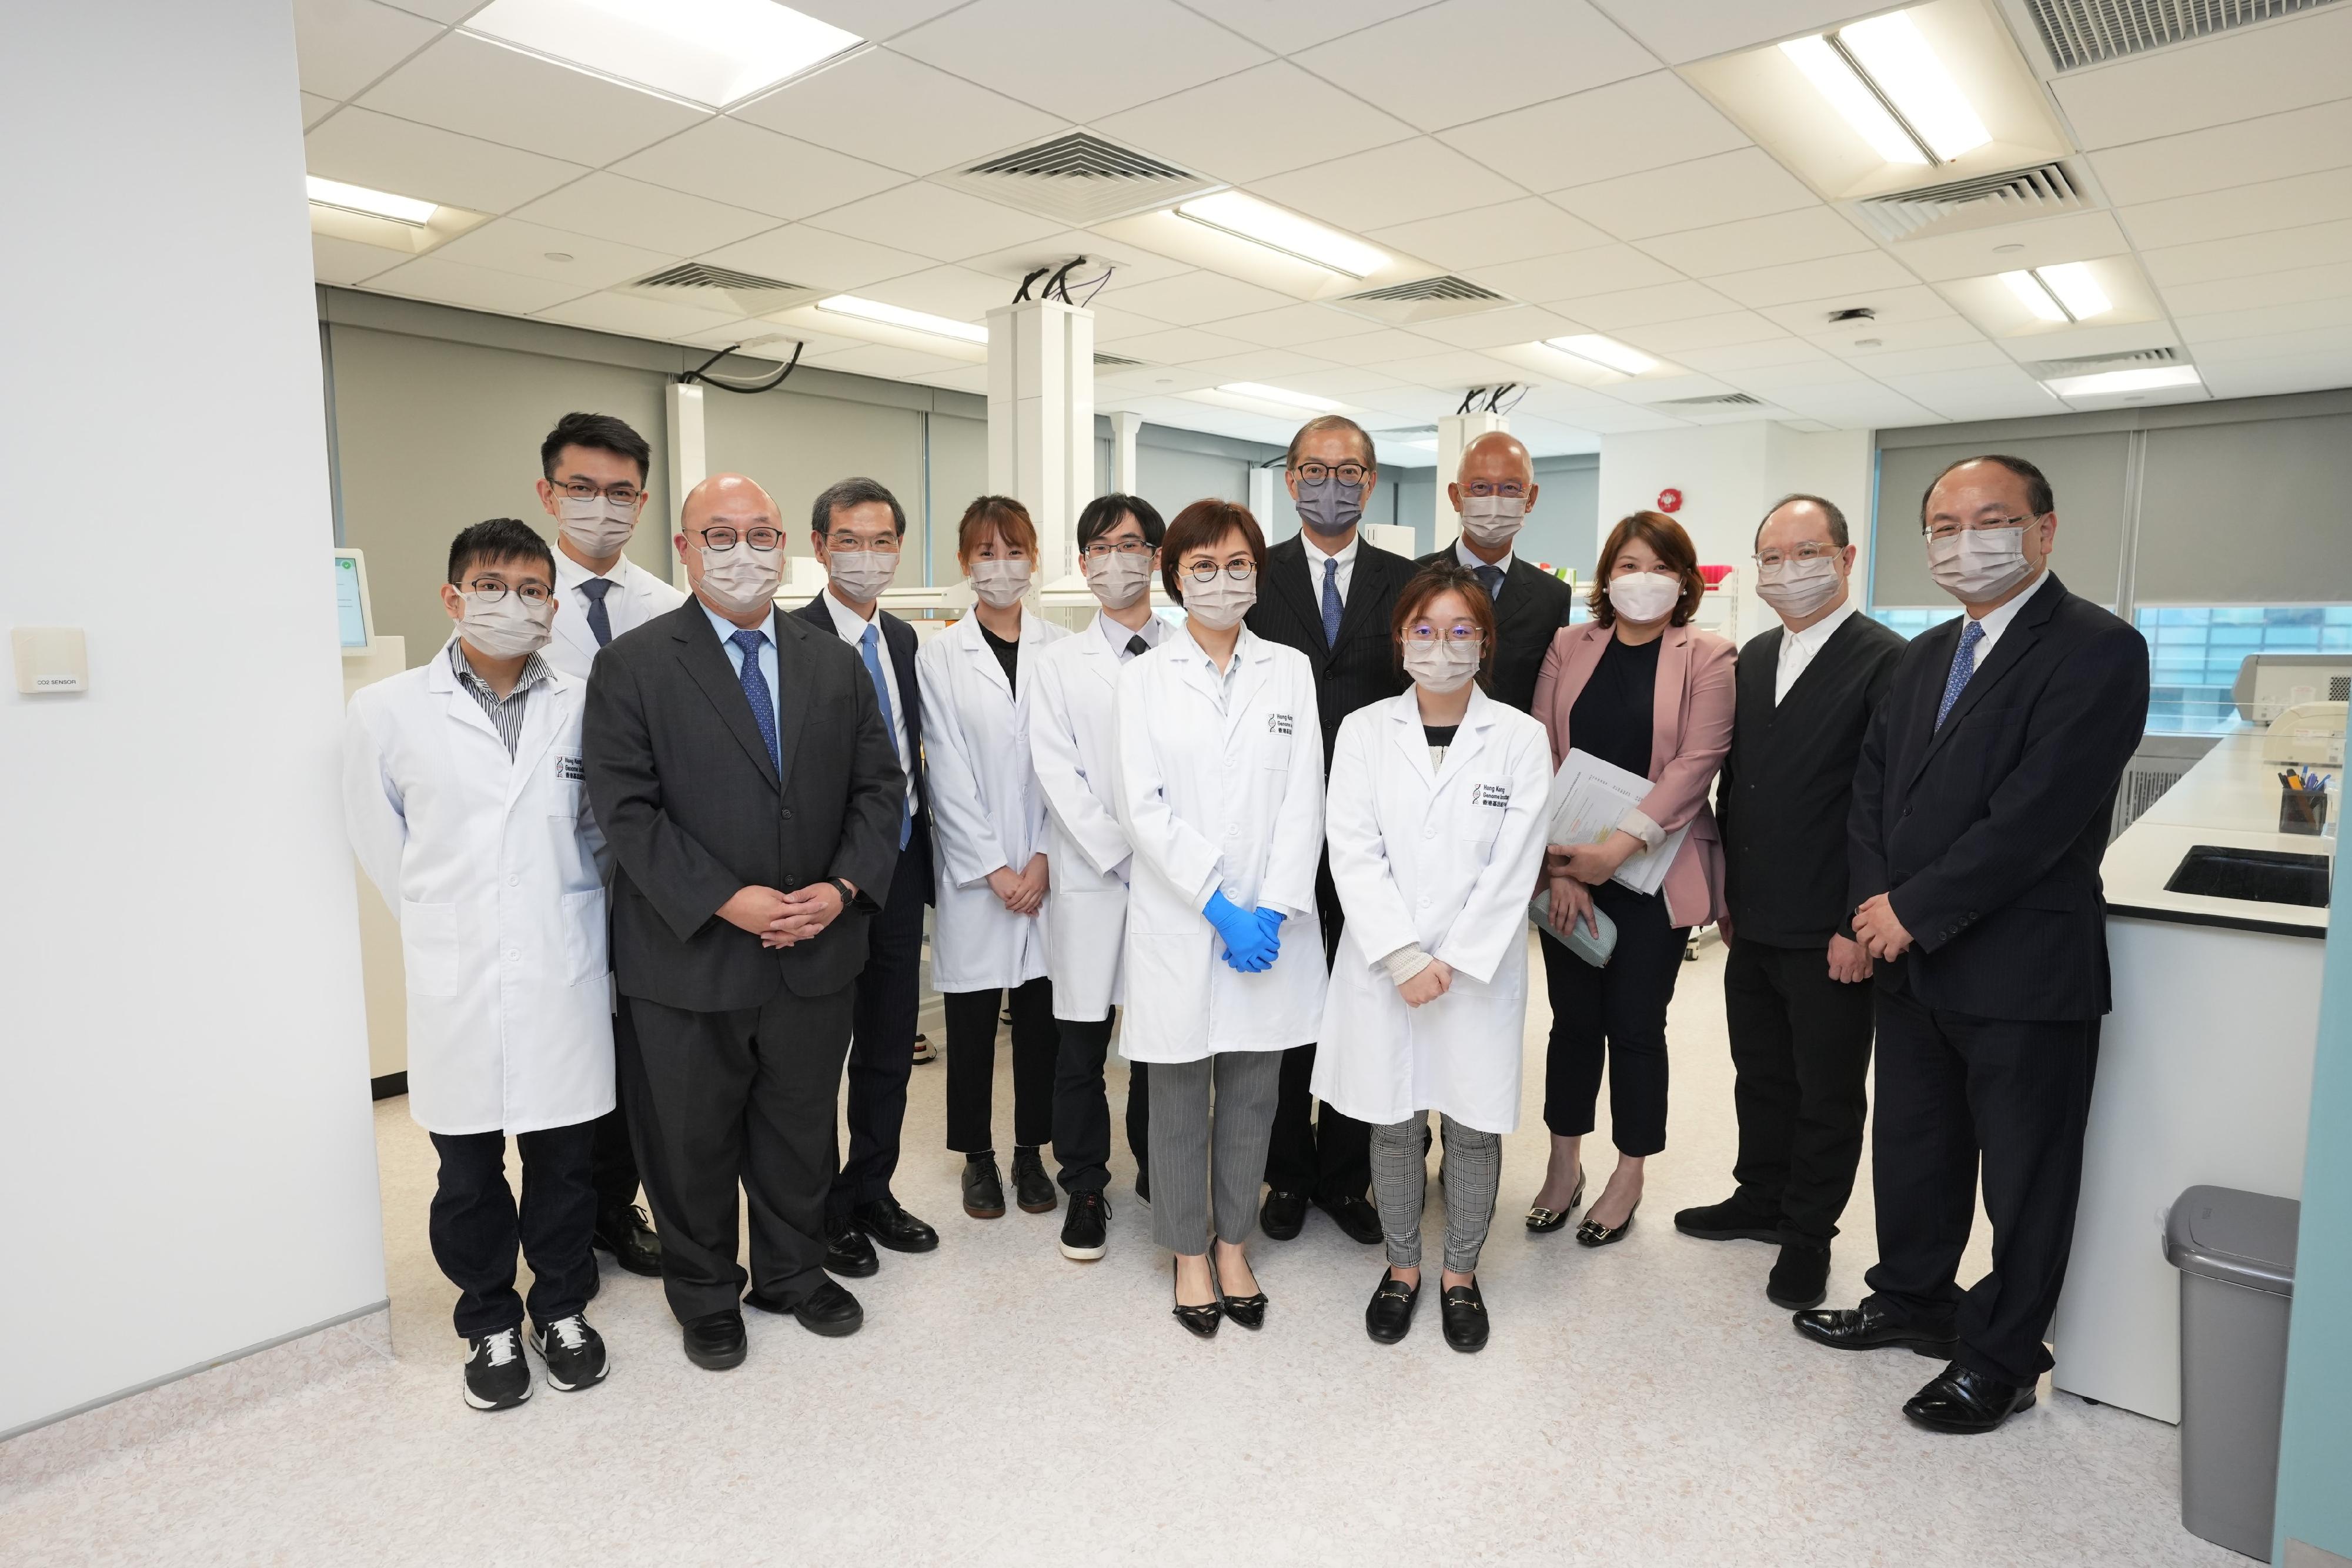 The Secretary for Health, Professor Lo Chung-mau (back row, fifth right), and the Under Secretary for Health, Dr Libby Lee (back row, third right), today (August 9) toured the laboratory of the Hong Kong Genome Institute (HKGI). They are pictured with staff of the laboratory in the company of the Chairperson of the HKGI, Mr Philip Tsai (back row, fourth right); the Deputy Chairperson of the HKGI, Professor Raymond Liang (back row, second right); and the Chief Executive Officer of the HKGI, Dr Lo Su-vui (back row, fourth left).